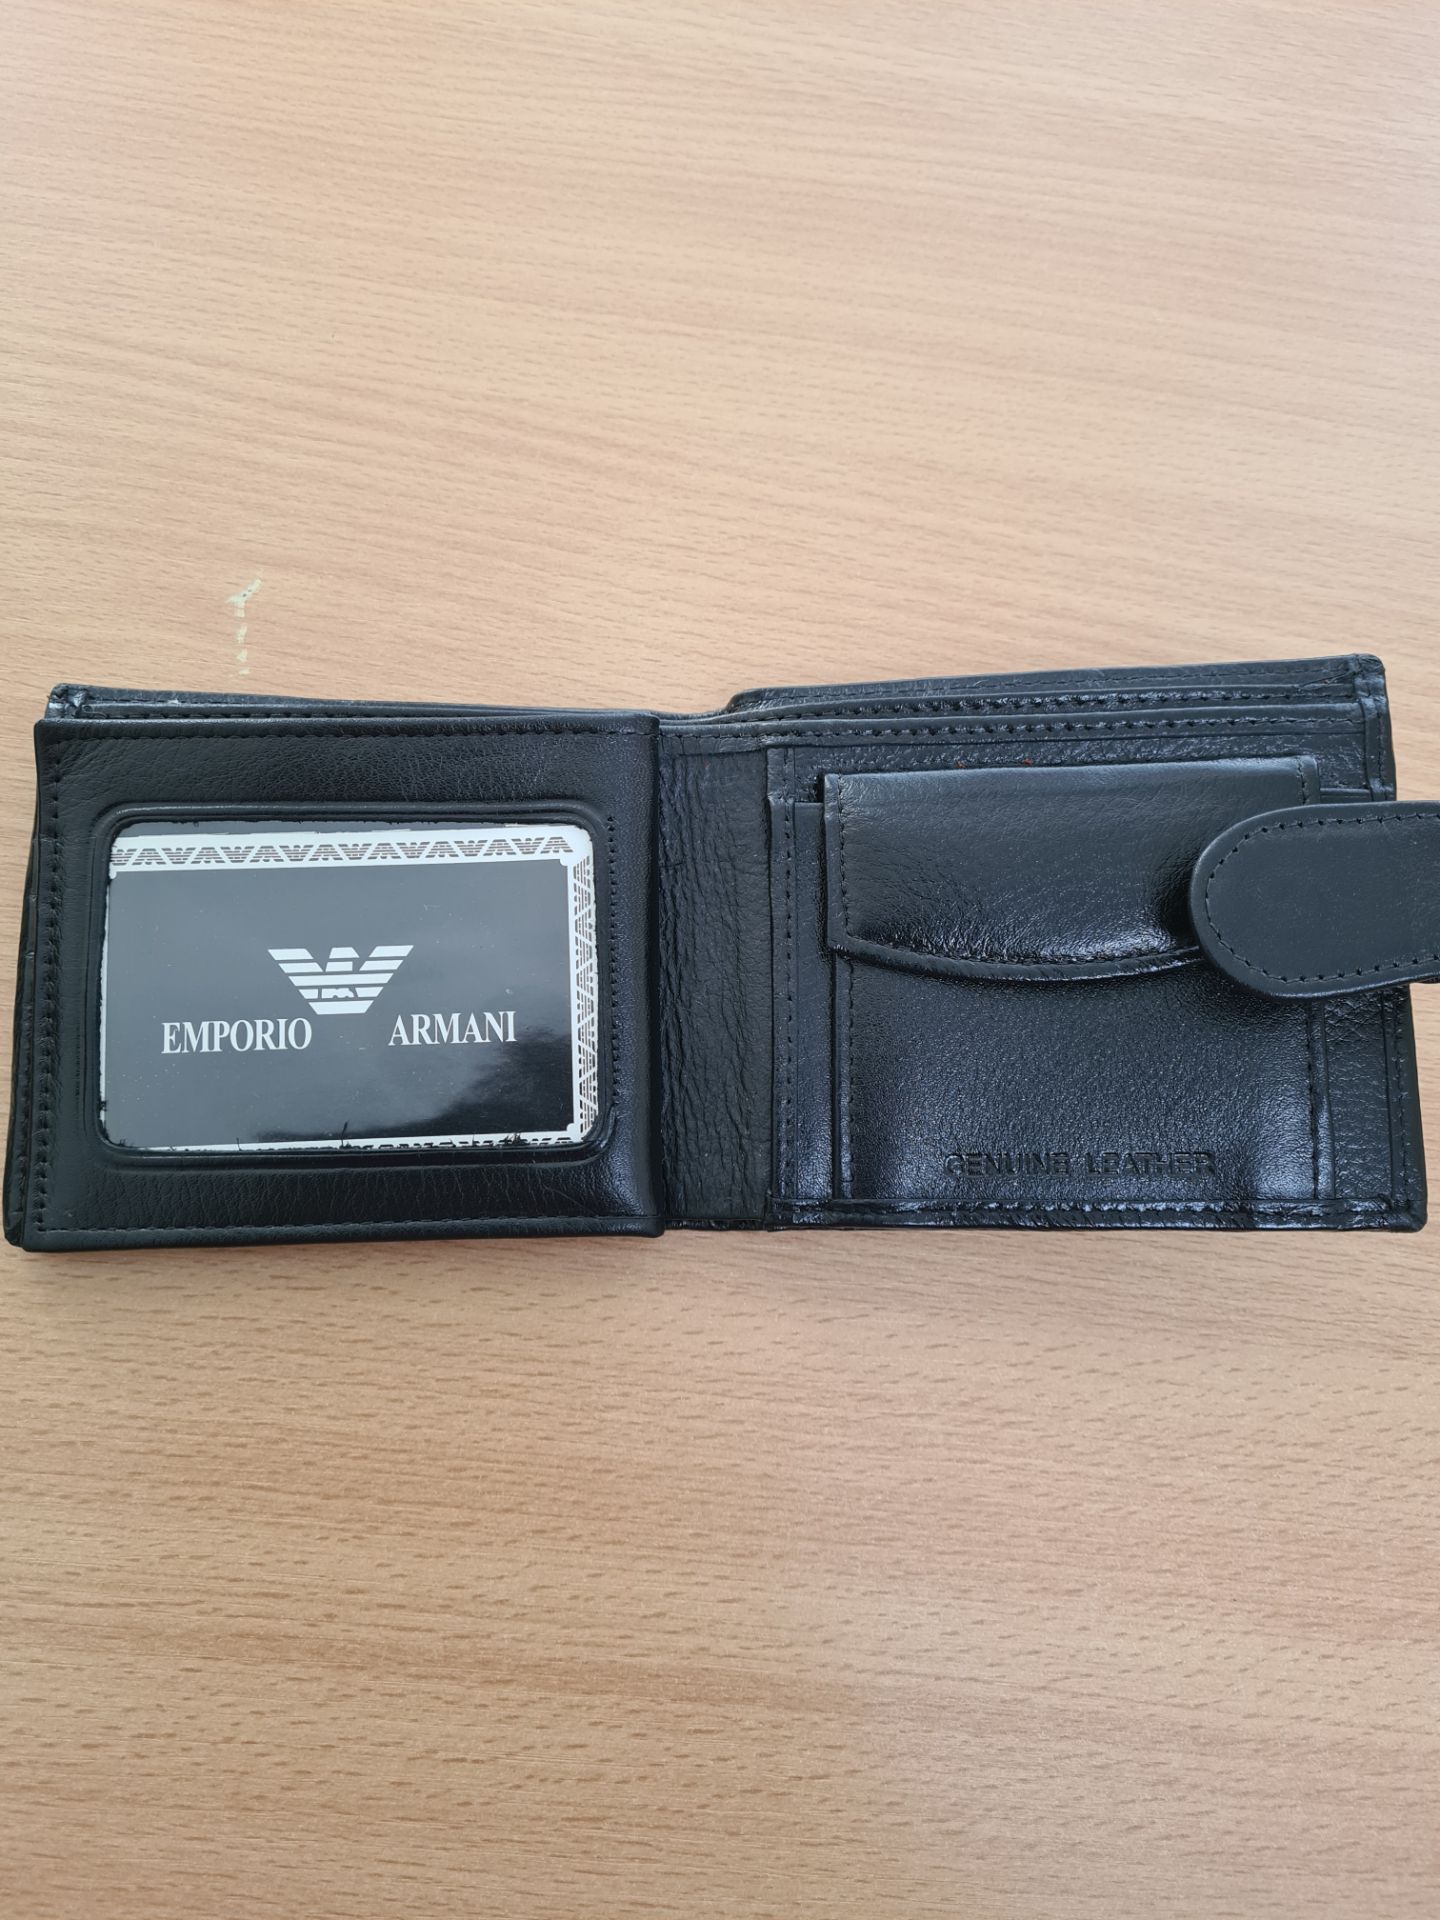 emporio armani men's leather wallet - new with box emporio armani men's ...